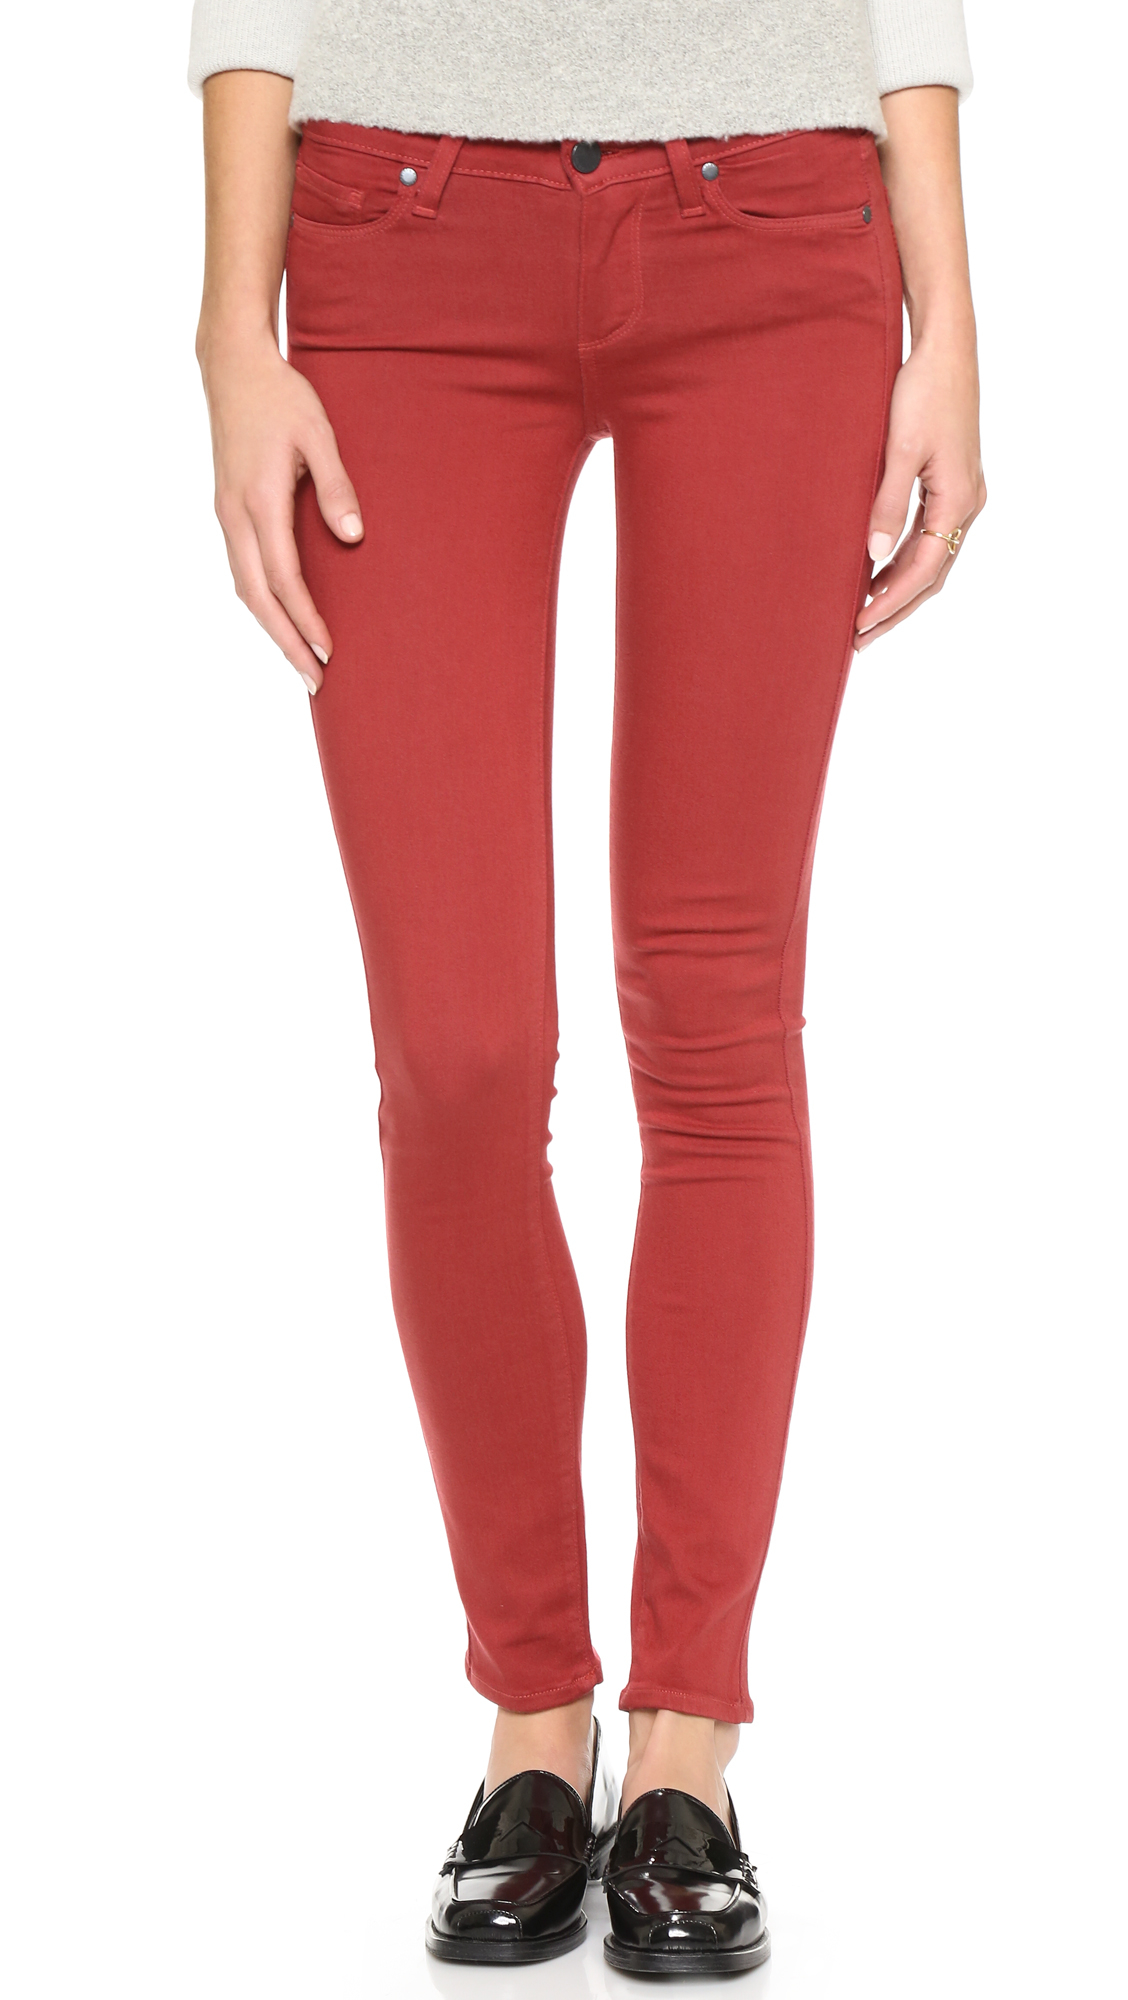 PAIGE Verdugo Ankle Skinny Jeans in Red | Lyst